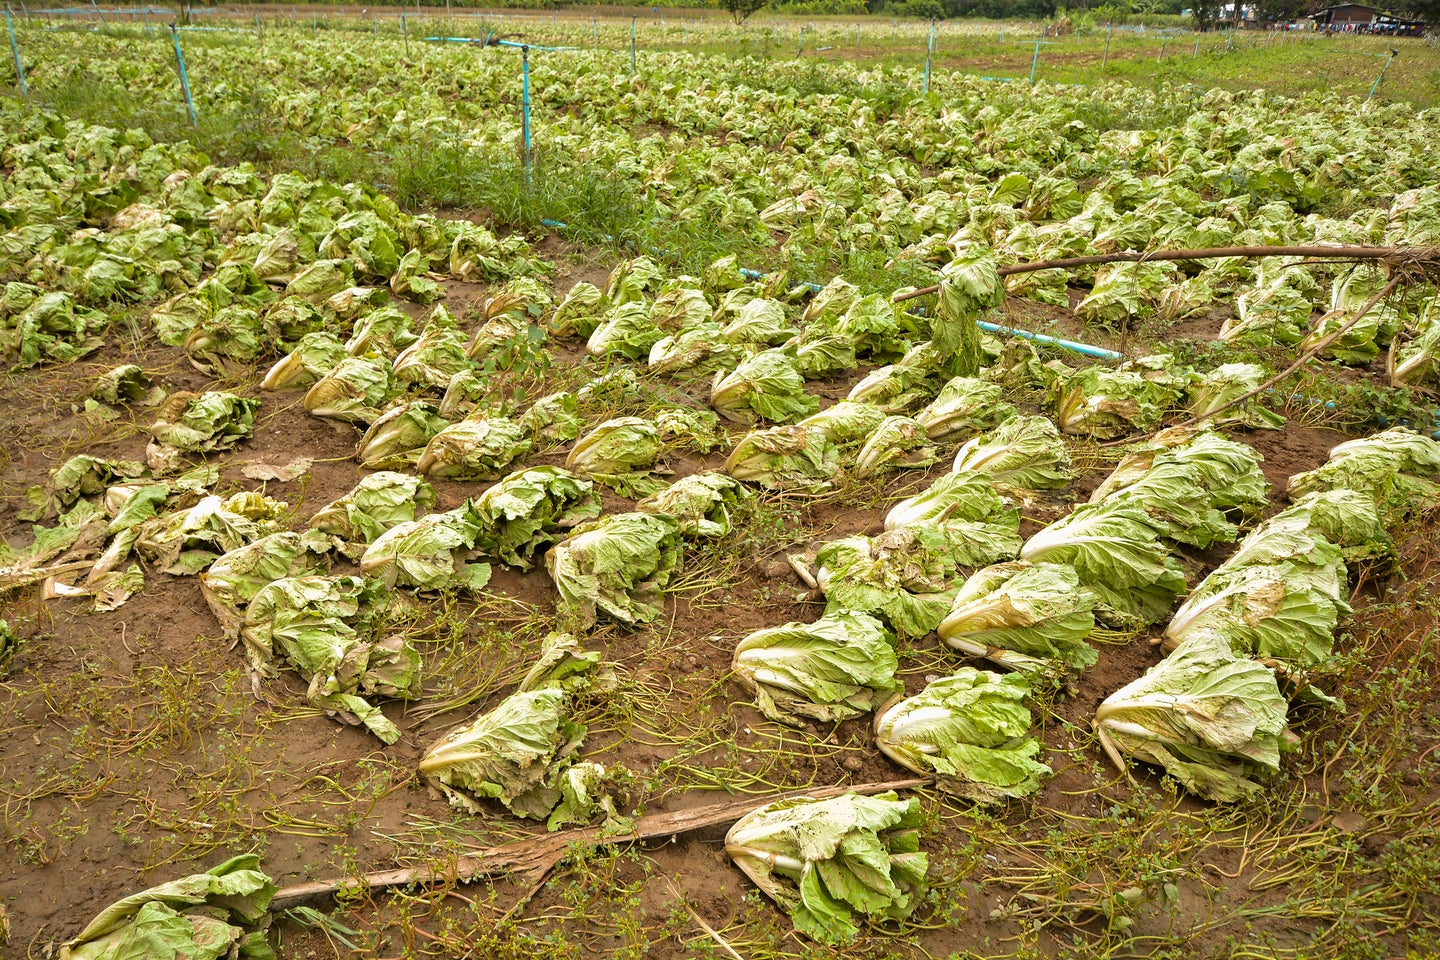 Cabbage destroyed by flooding